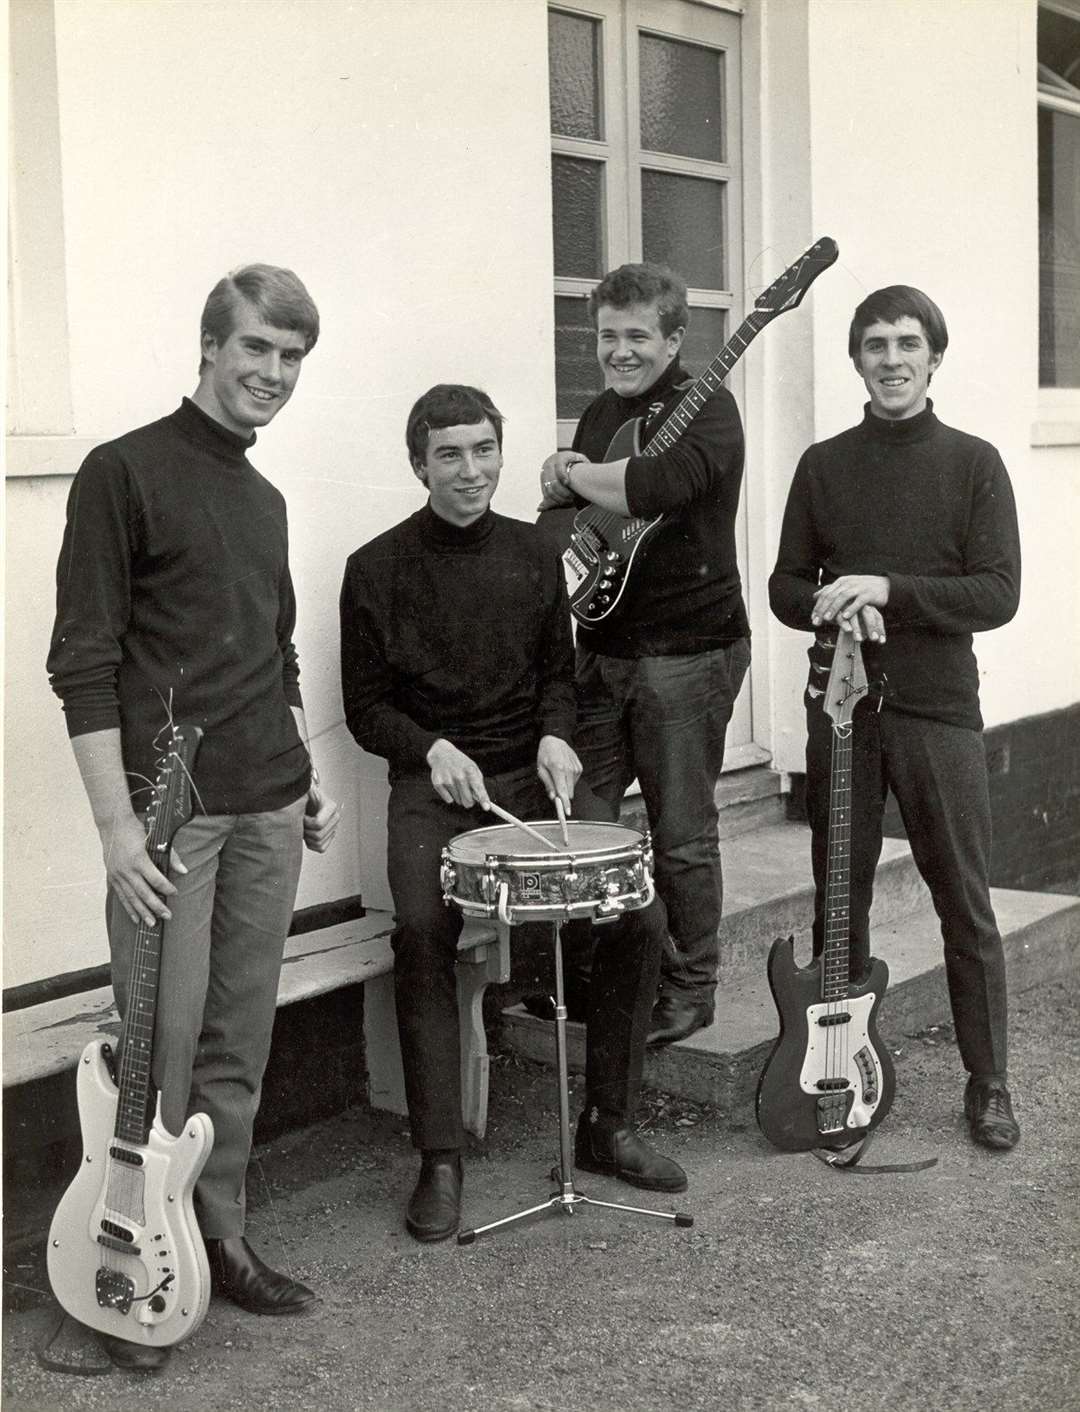 The original line-up for the Poor Boys Soul Band, from left, Dick Naylor, Bob Lamb, Mark Pentecost and Malcolm Bray.